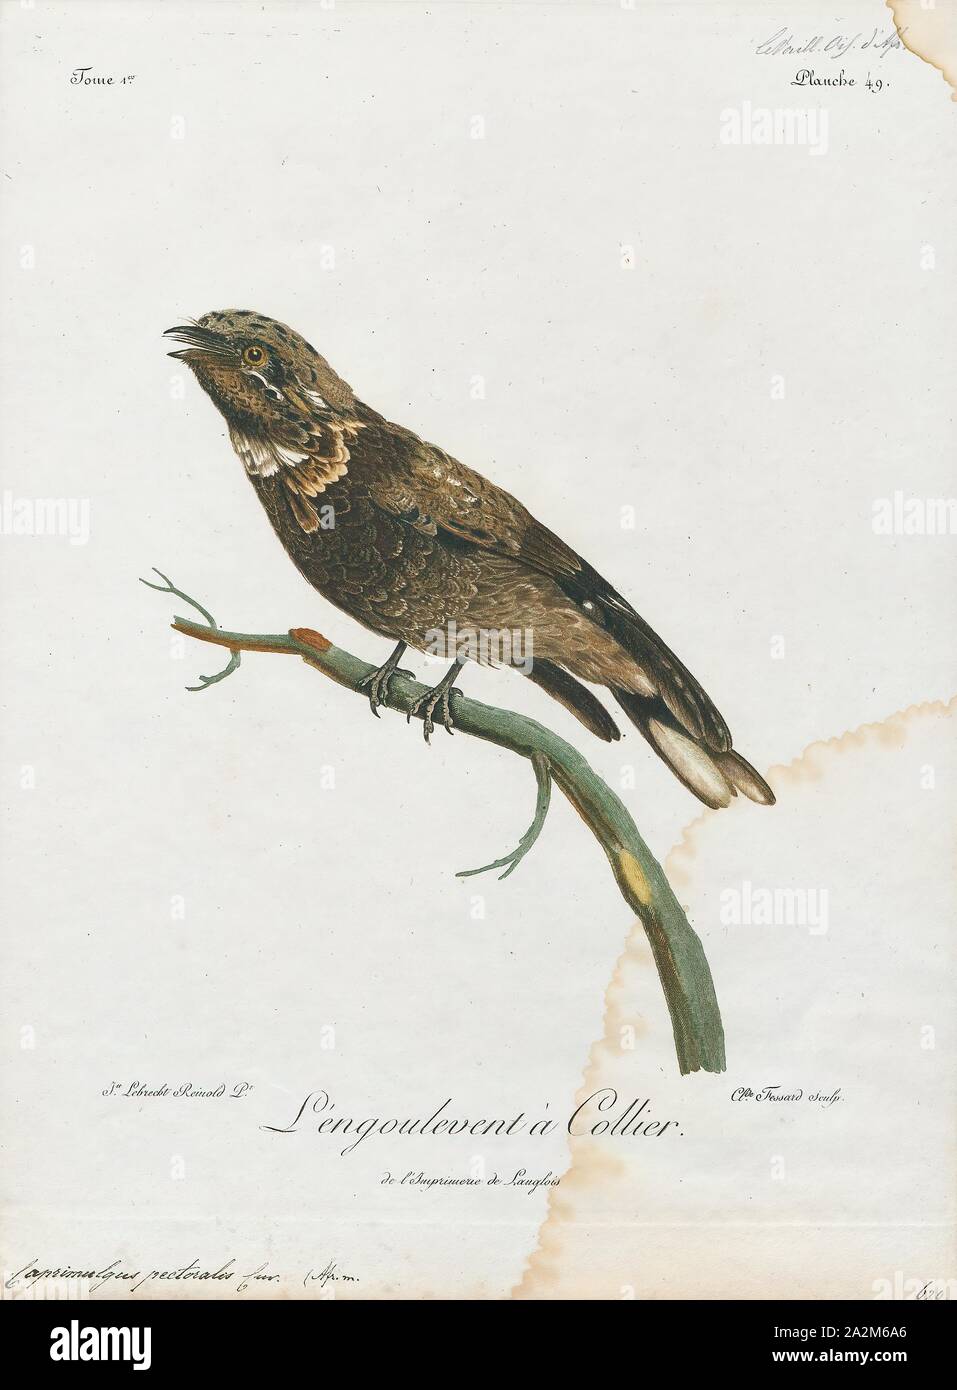 Caprimulgus pectoralis, Print, The fiery-necked nightjar (Caprimulgus pectoralis) is a species of nightjar in the family Caprimulgidae, which occurs in Africa south of the equator. Its distinctive and frequently uttered call is rendered as 'good-lord-deliver-us'. It is replaced in the tropics by a near relative, the black-shouldered nightjar. In addition to the latter, it forms a species complex with the Montane and Ruwenzori nightjars., 1796-1808 Stock Photo